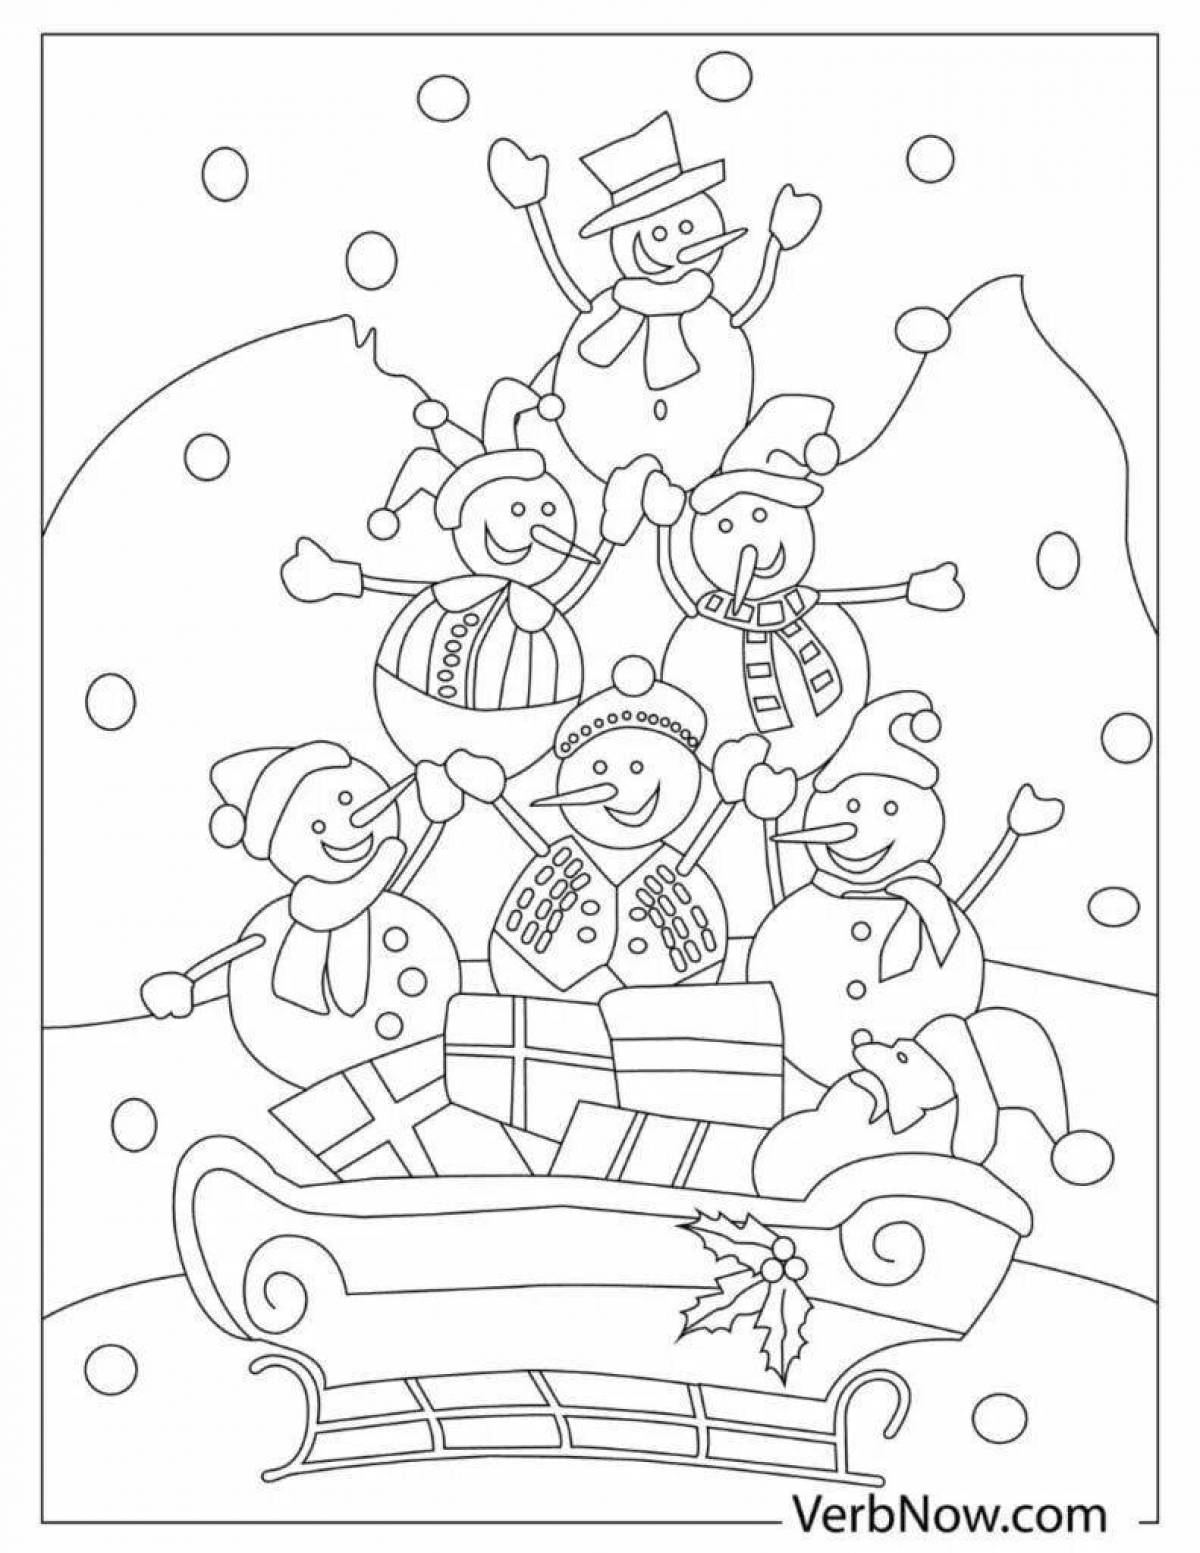 Amazing Christmas miracle coloring book